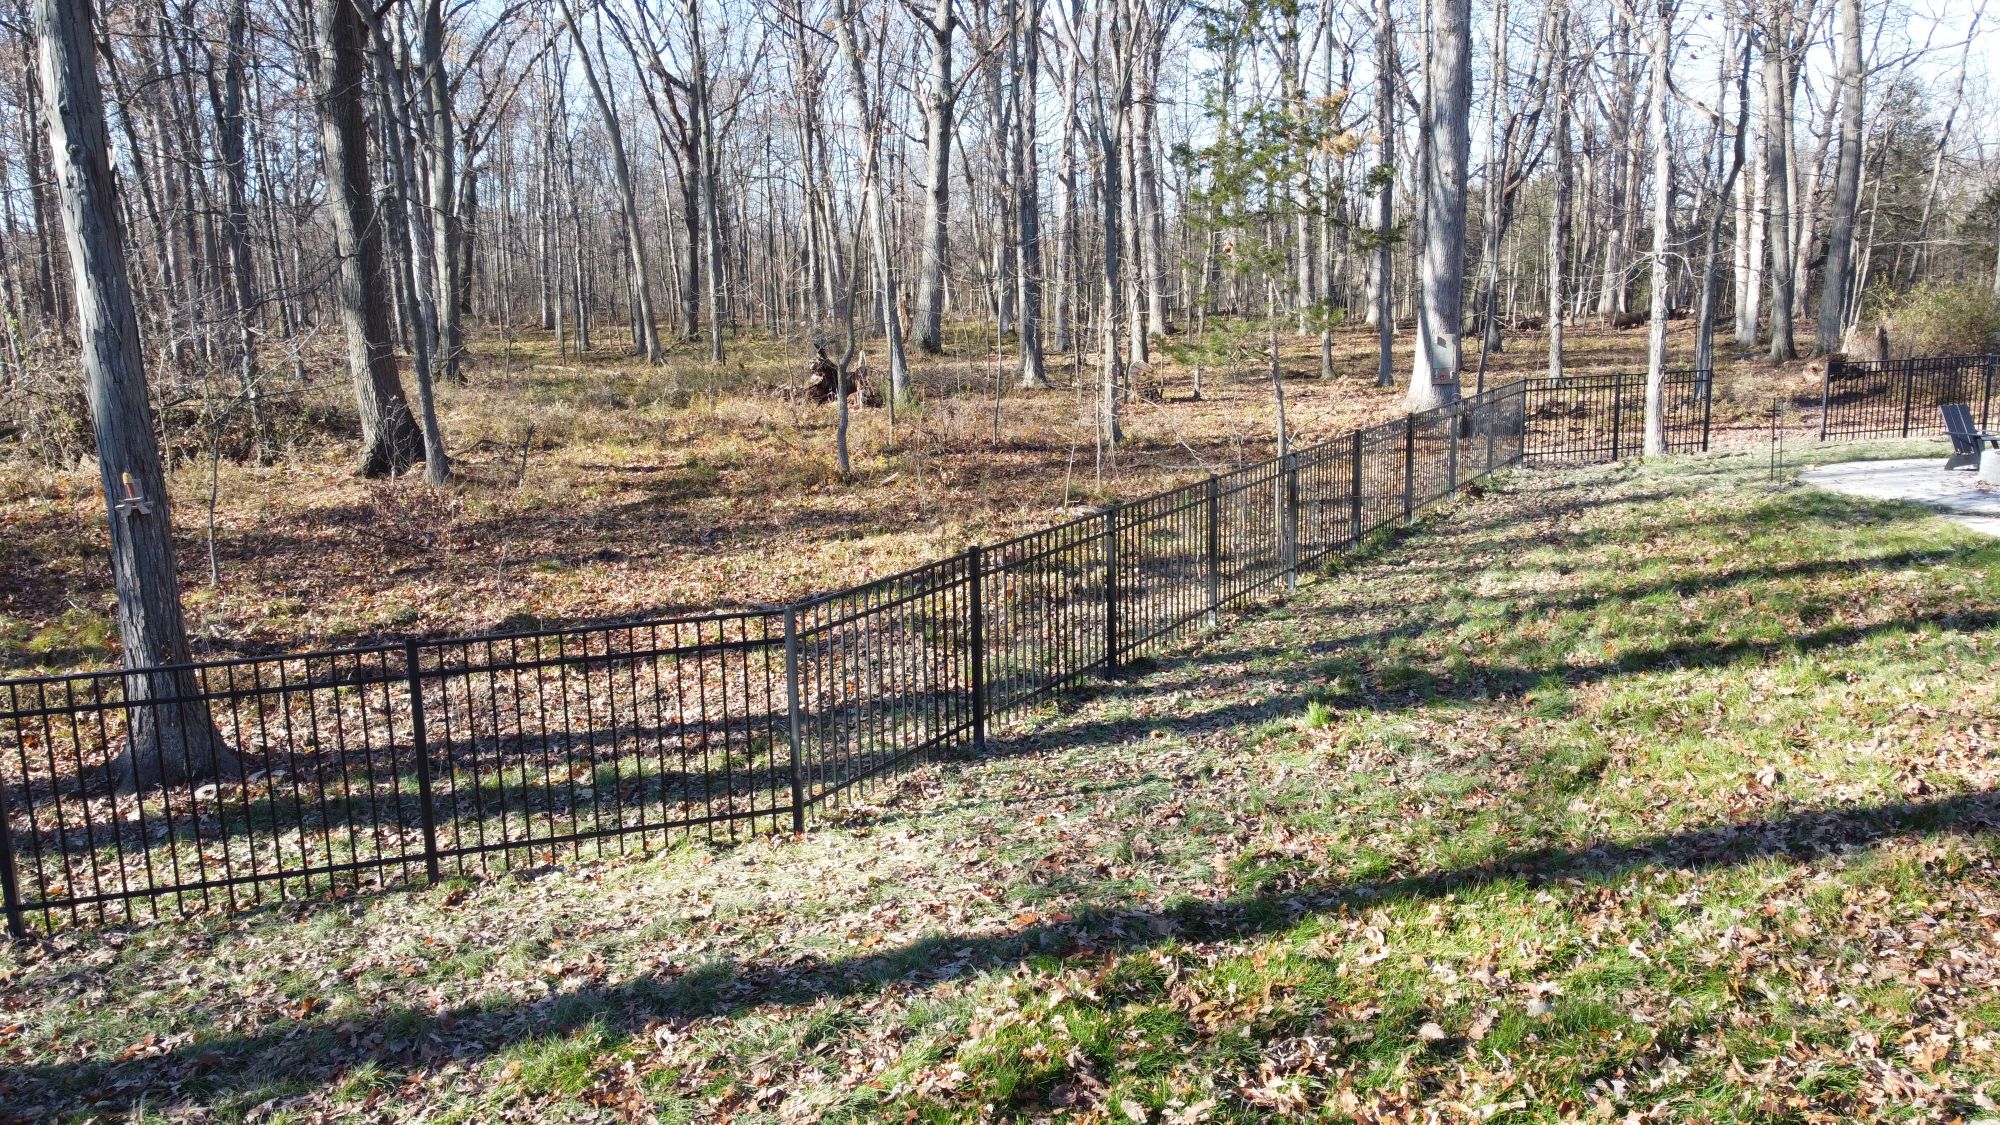 With lakeshore landscaping we extended helped build out this cabin in the woods into a place where the family could relax to and bring the dogs. Set on 40 acres and formerly fully treed, we managed to blend the rod iron fence into the tree line.